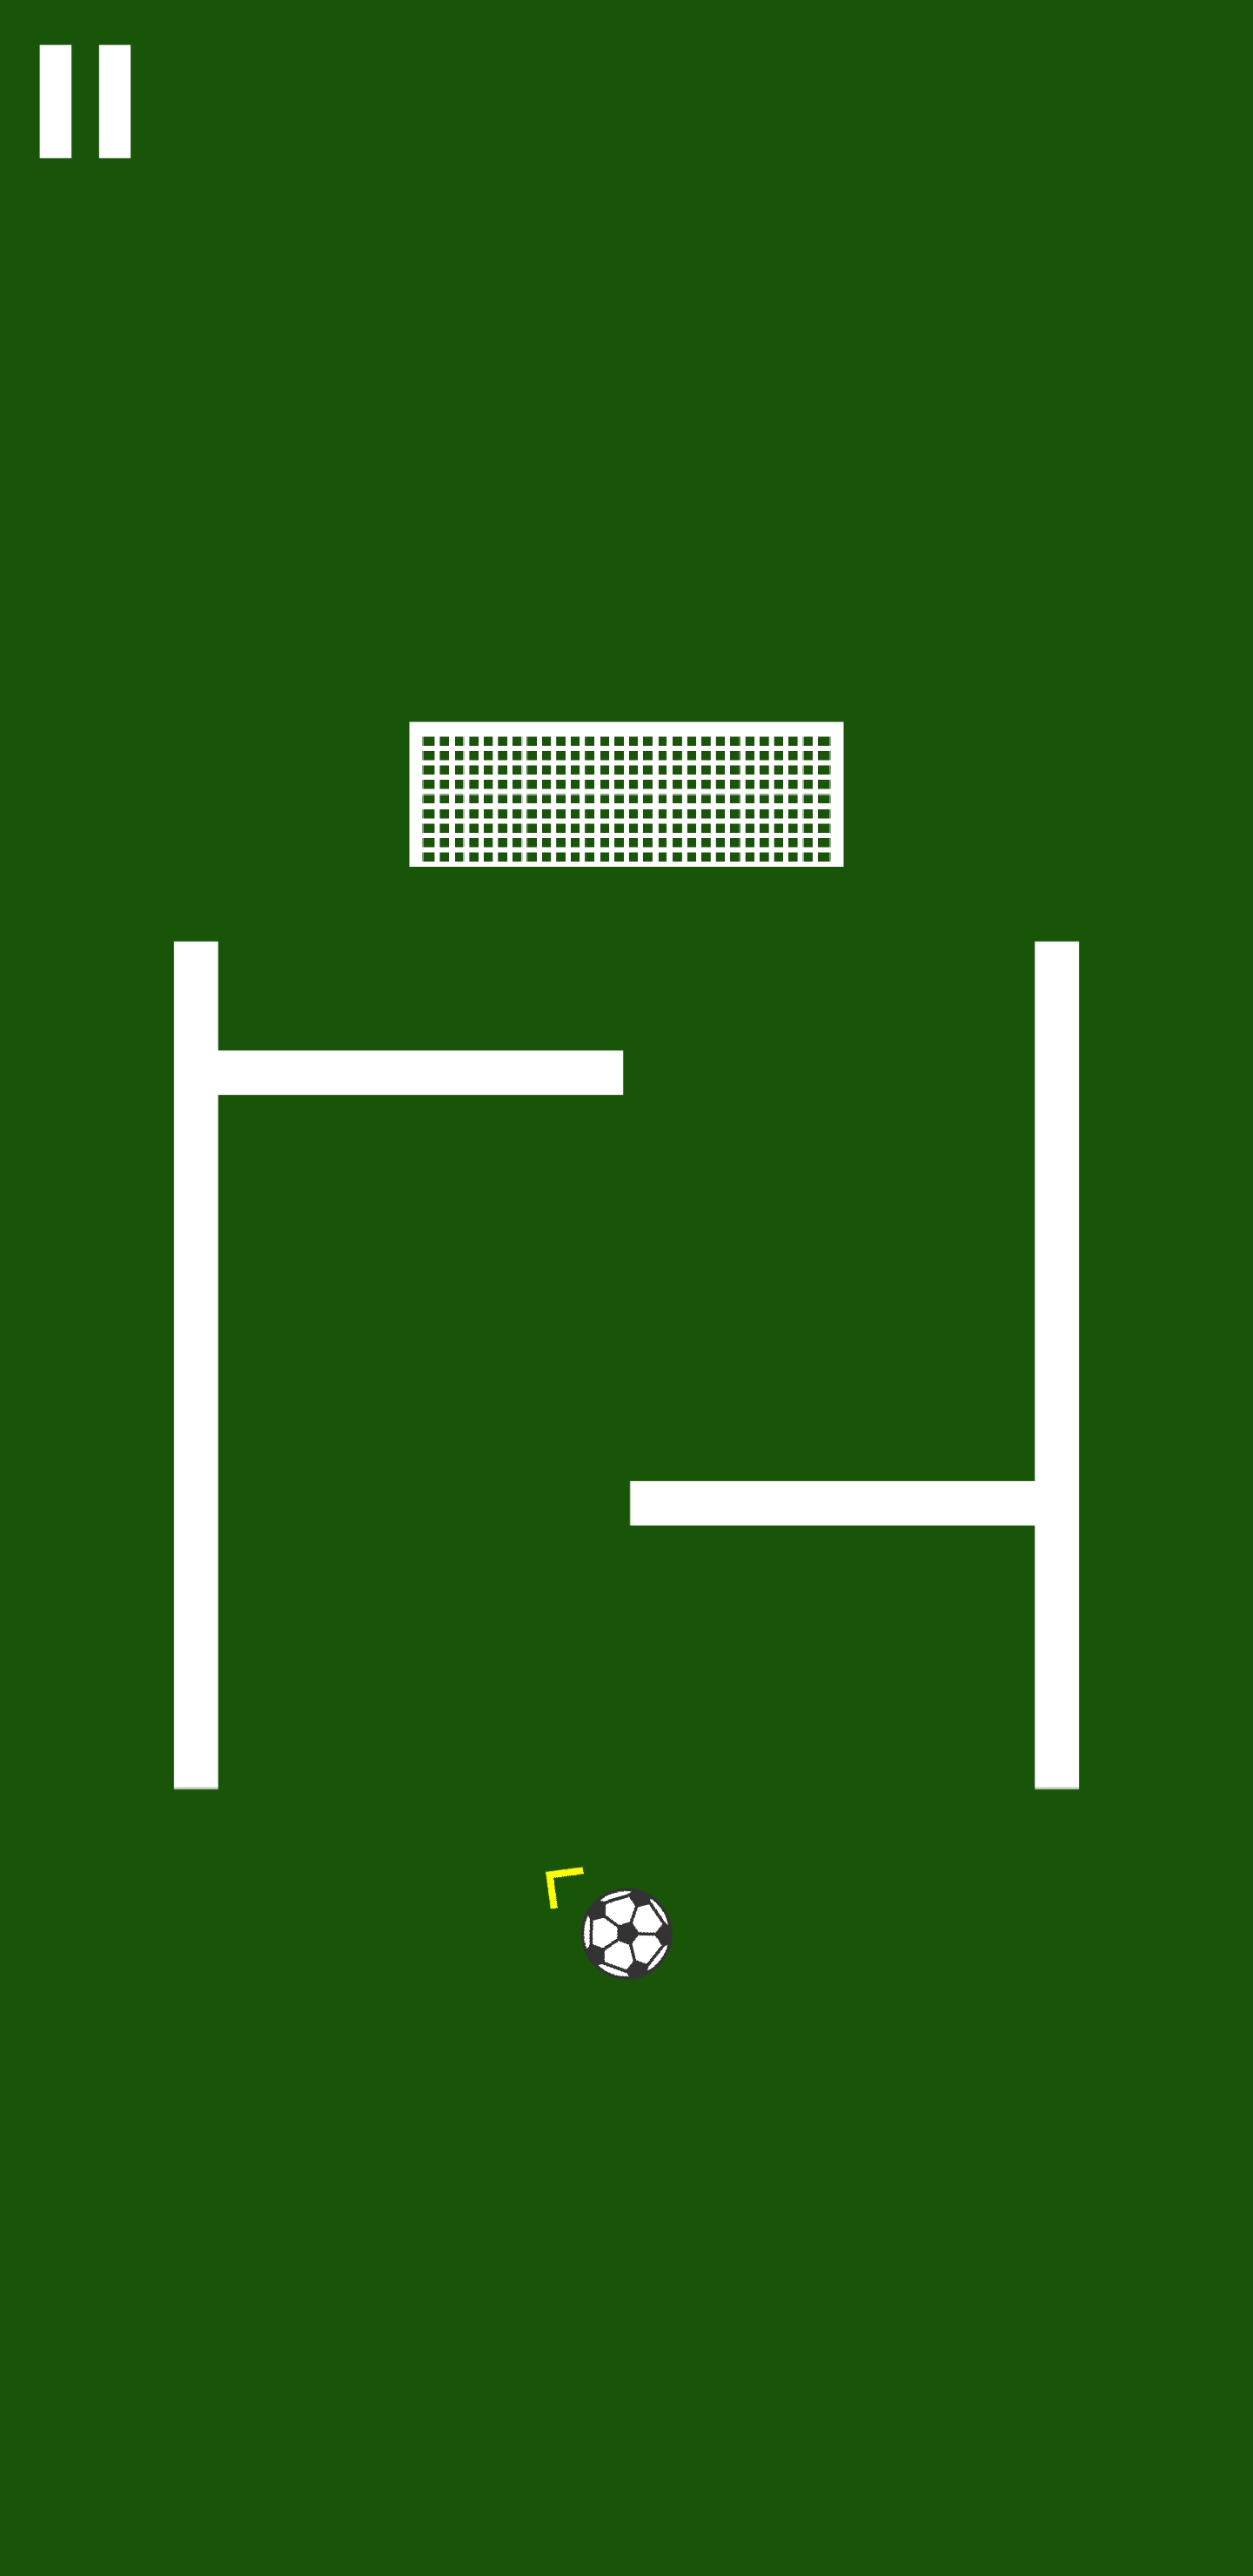 Finger Football - Unity Hyper Casual Game